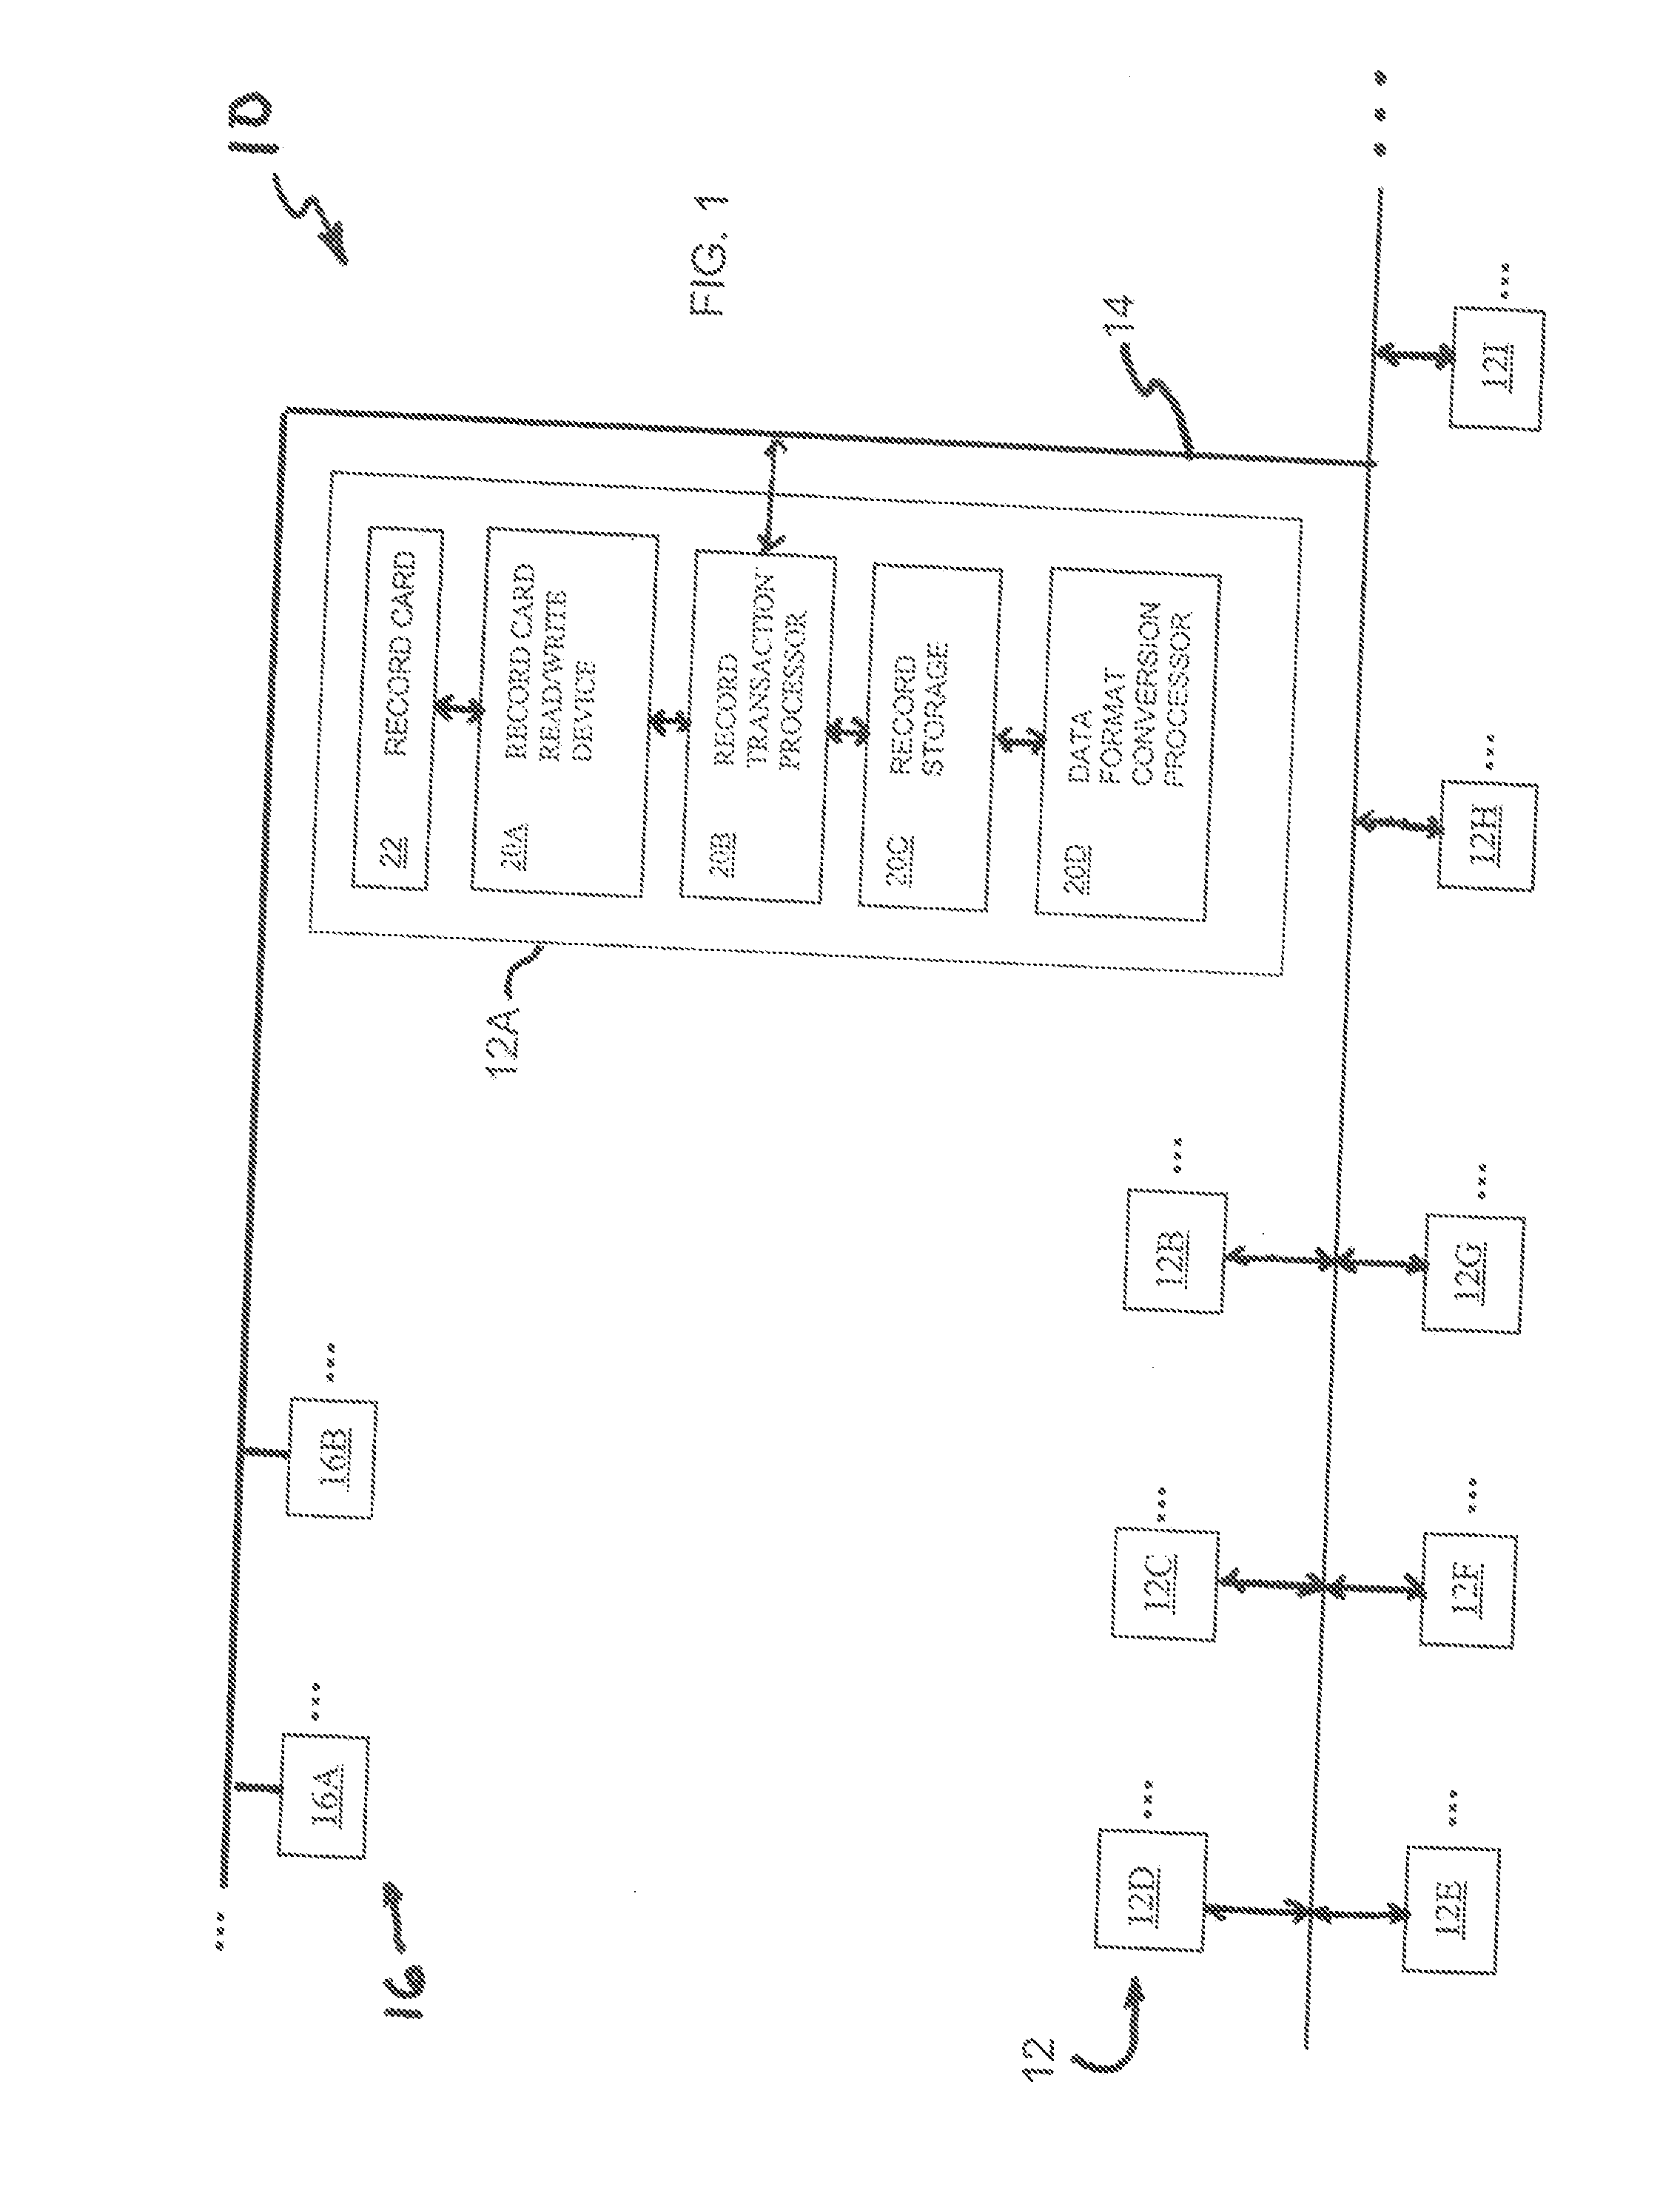 Personal record system with centralized data storage and distributed record generation and access